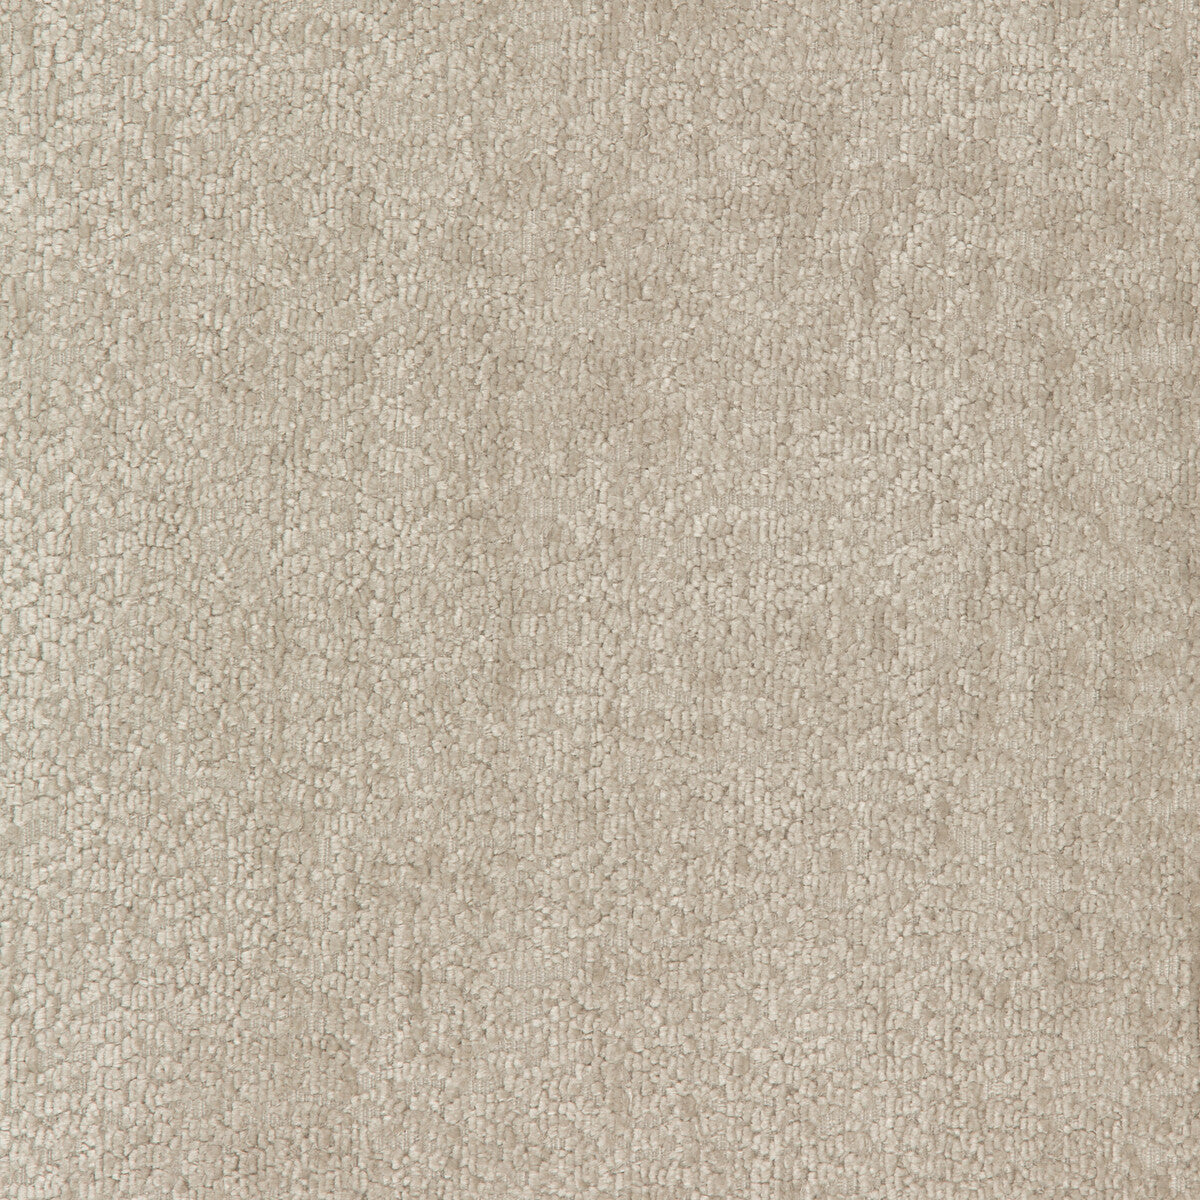 Kravet Smart fabric in 35974-11 color - pattern 35974.11.0 - by Kravet Smart in the Performance Crypton Home collection